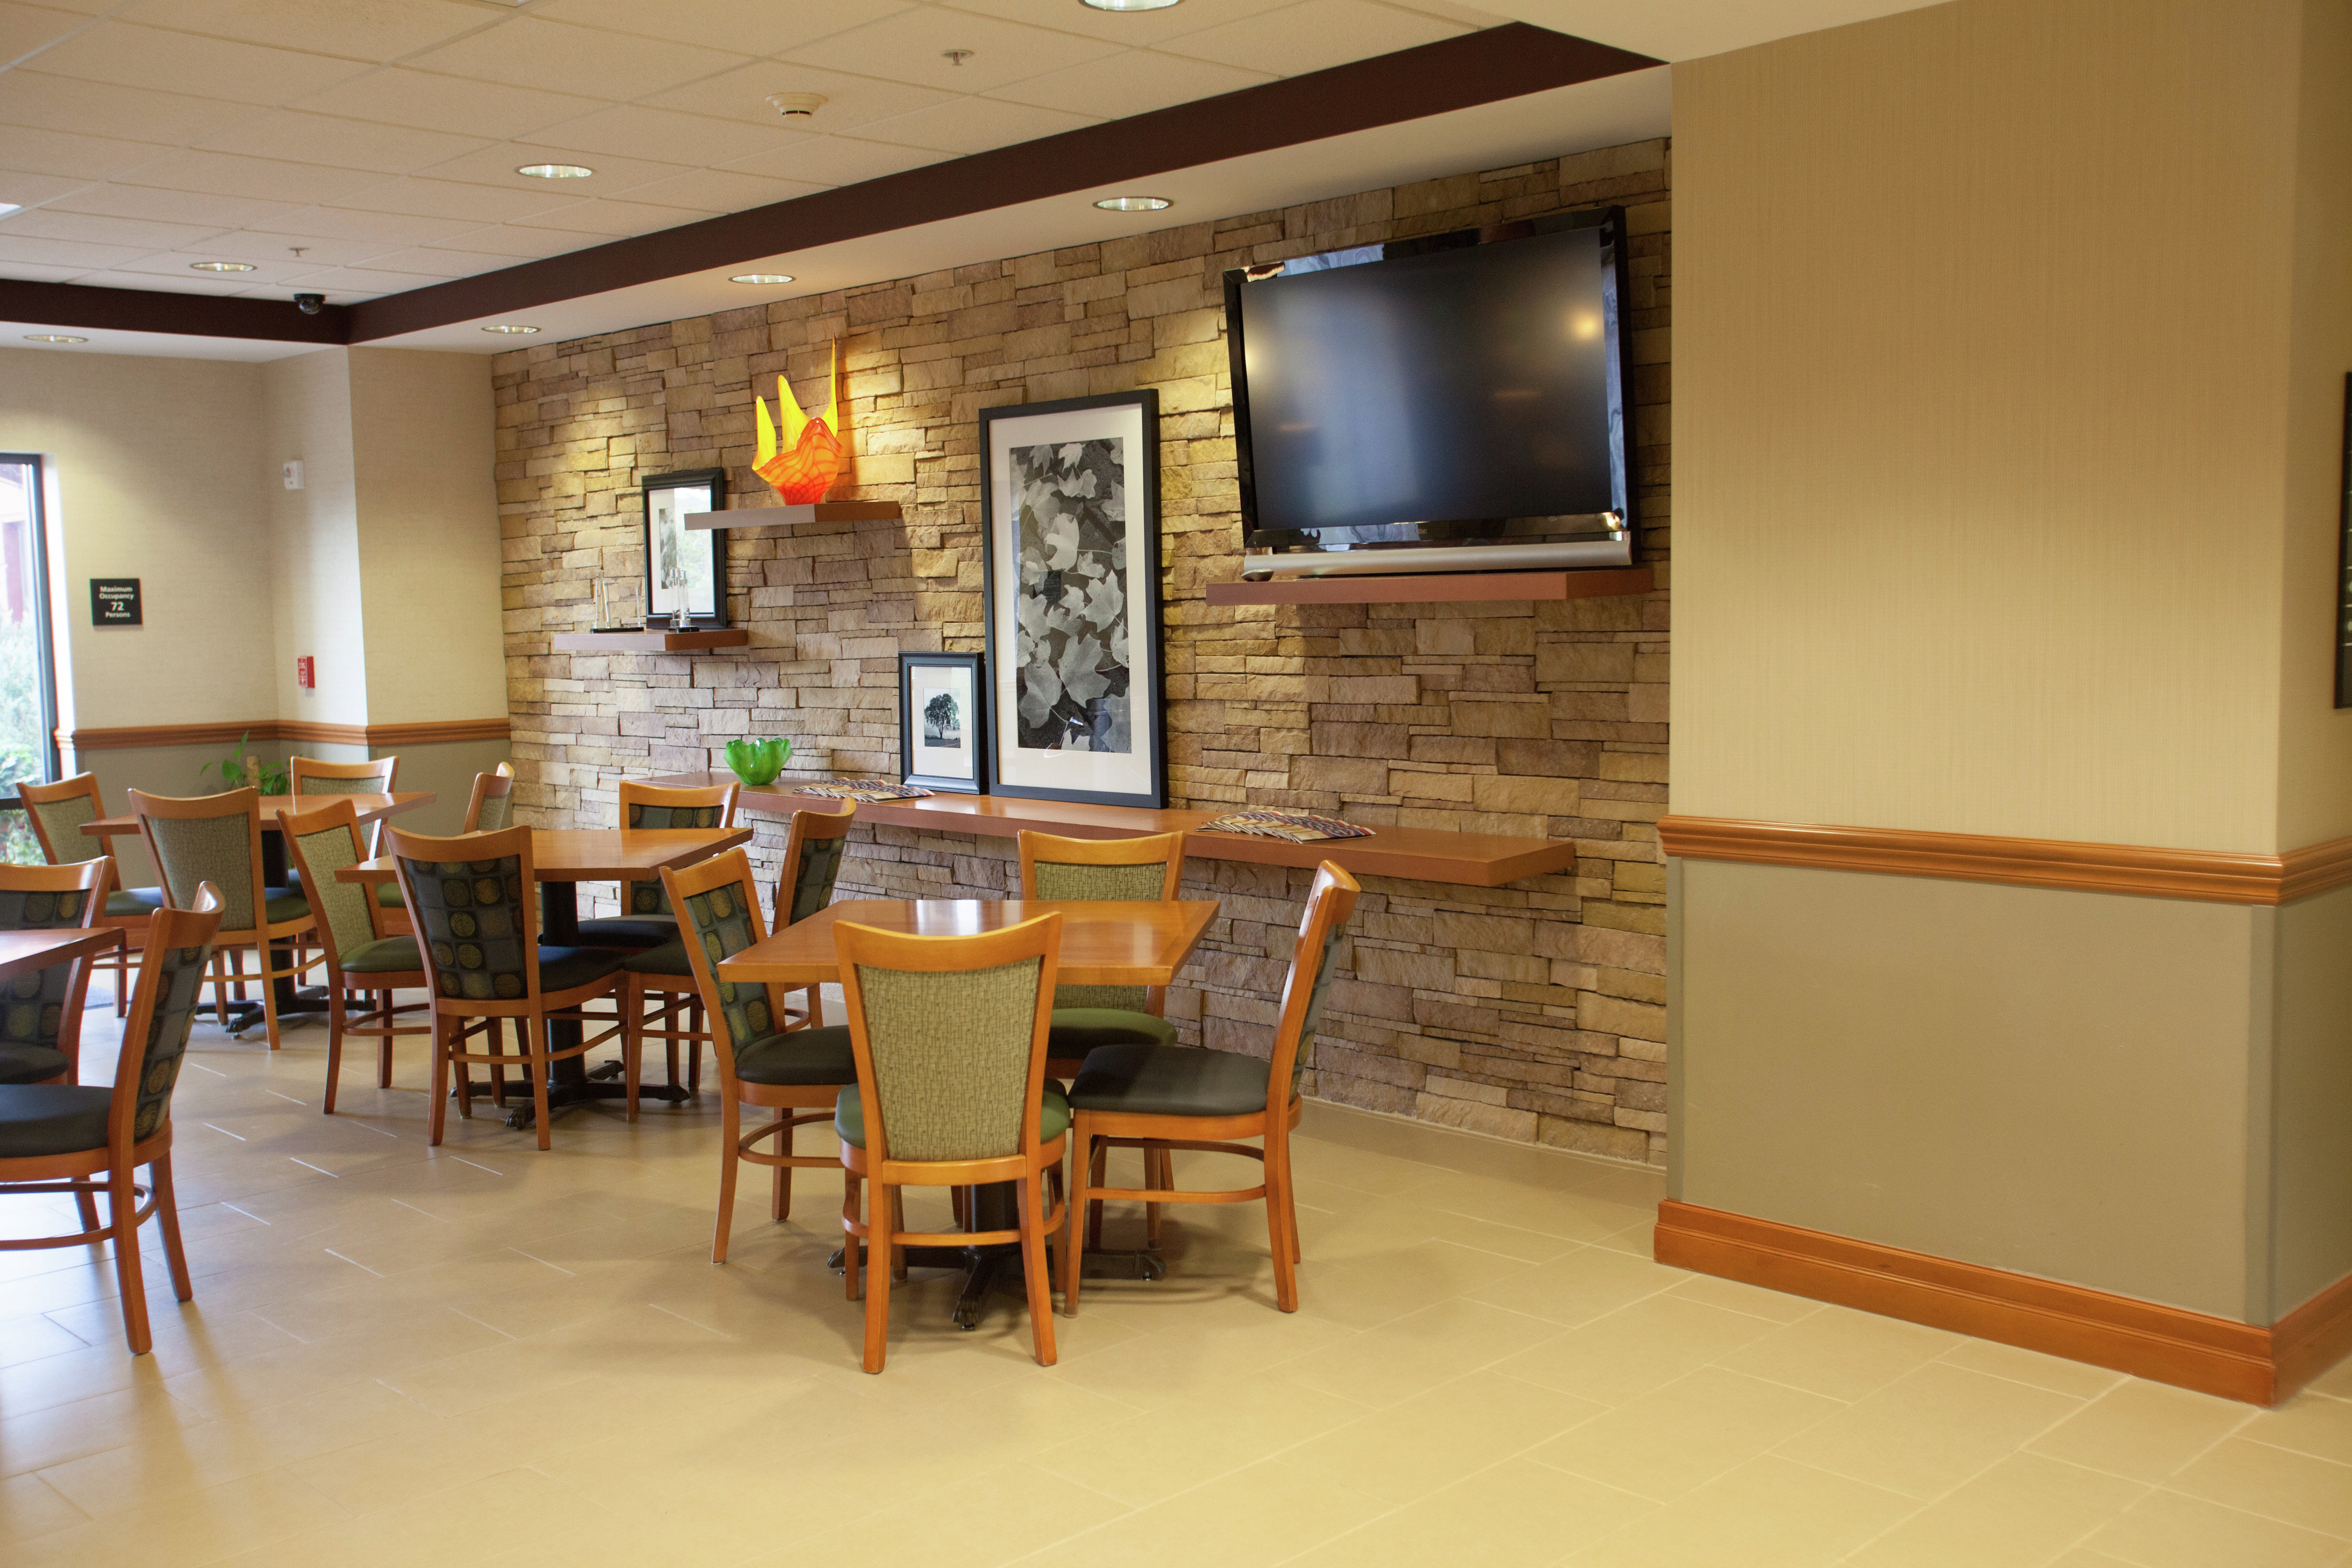 Free Breakfast Dining Area with HDTV in Lobby